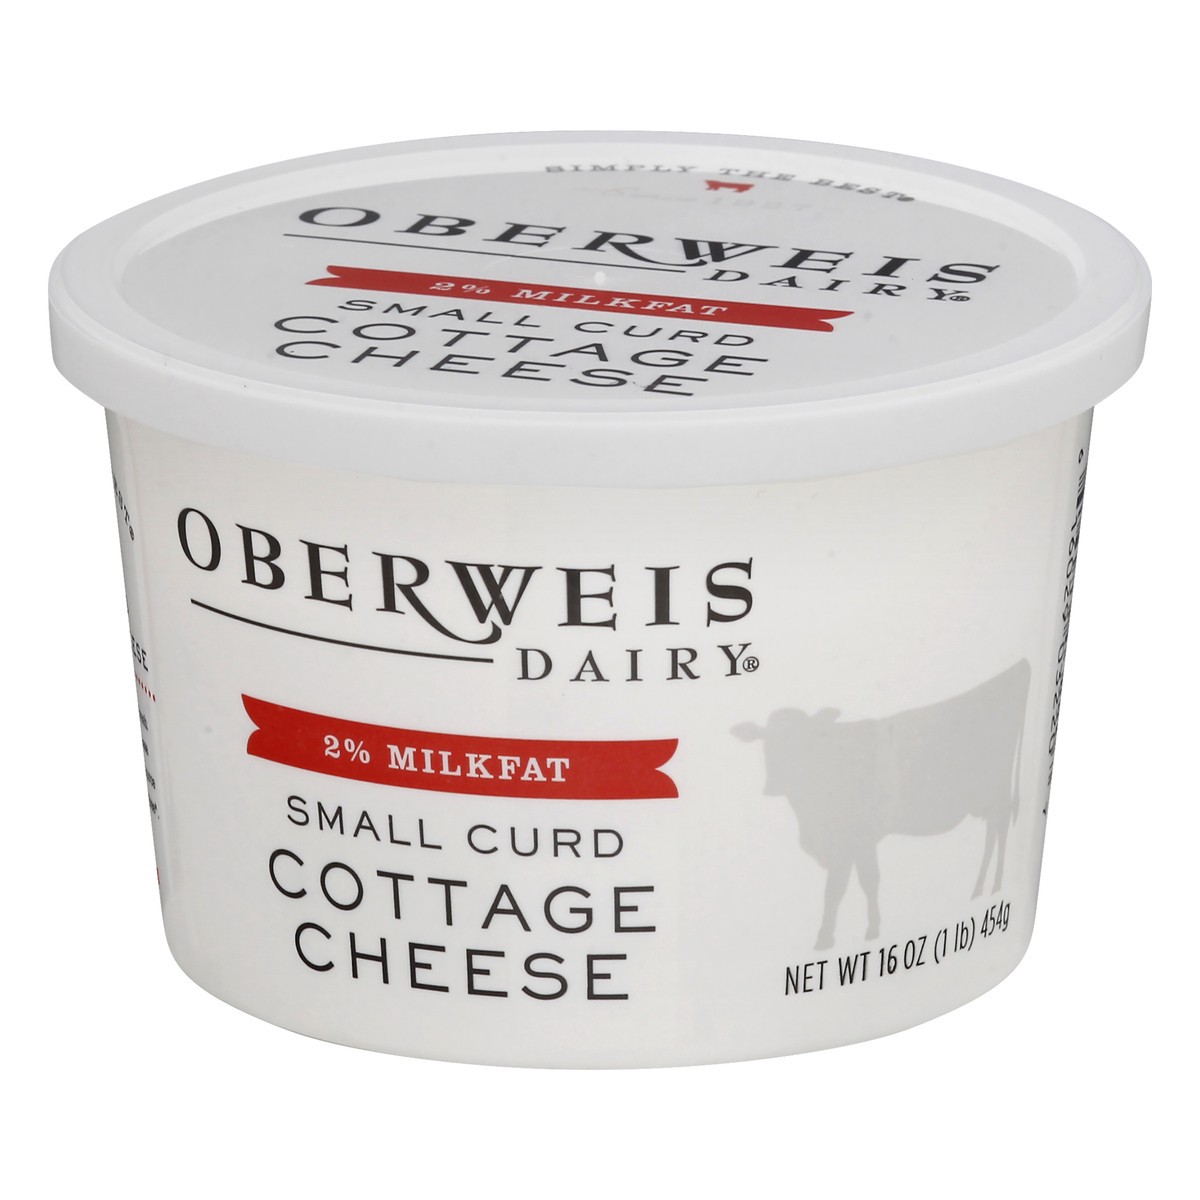 slide 2 of 13, Oberweis Small Curd 2% Milkfat Cottage Cheese 16 oz, 16 oz